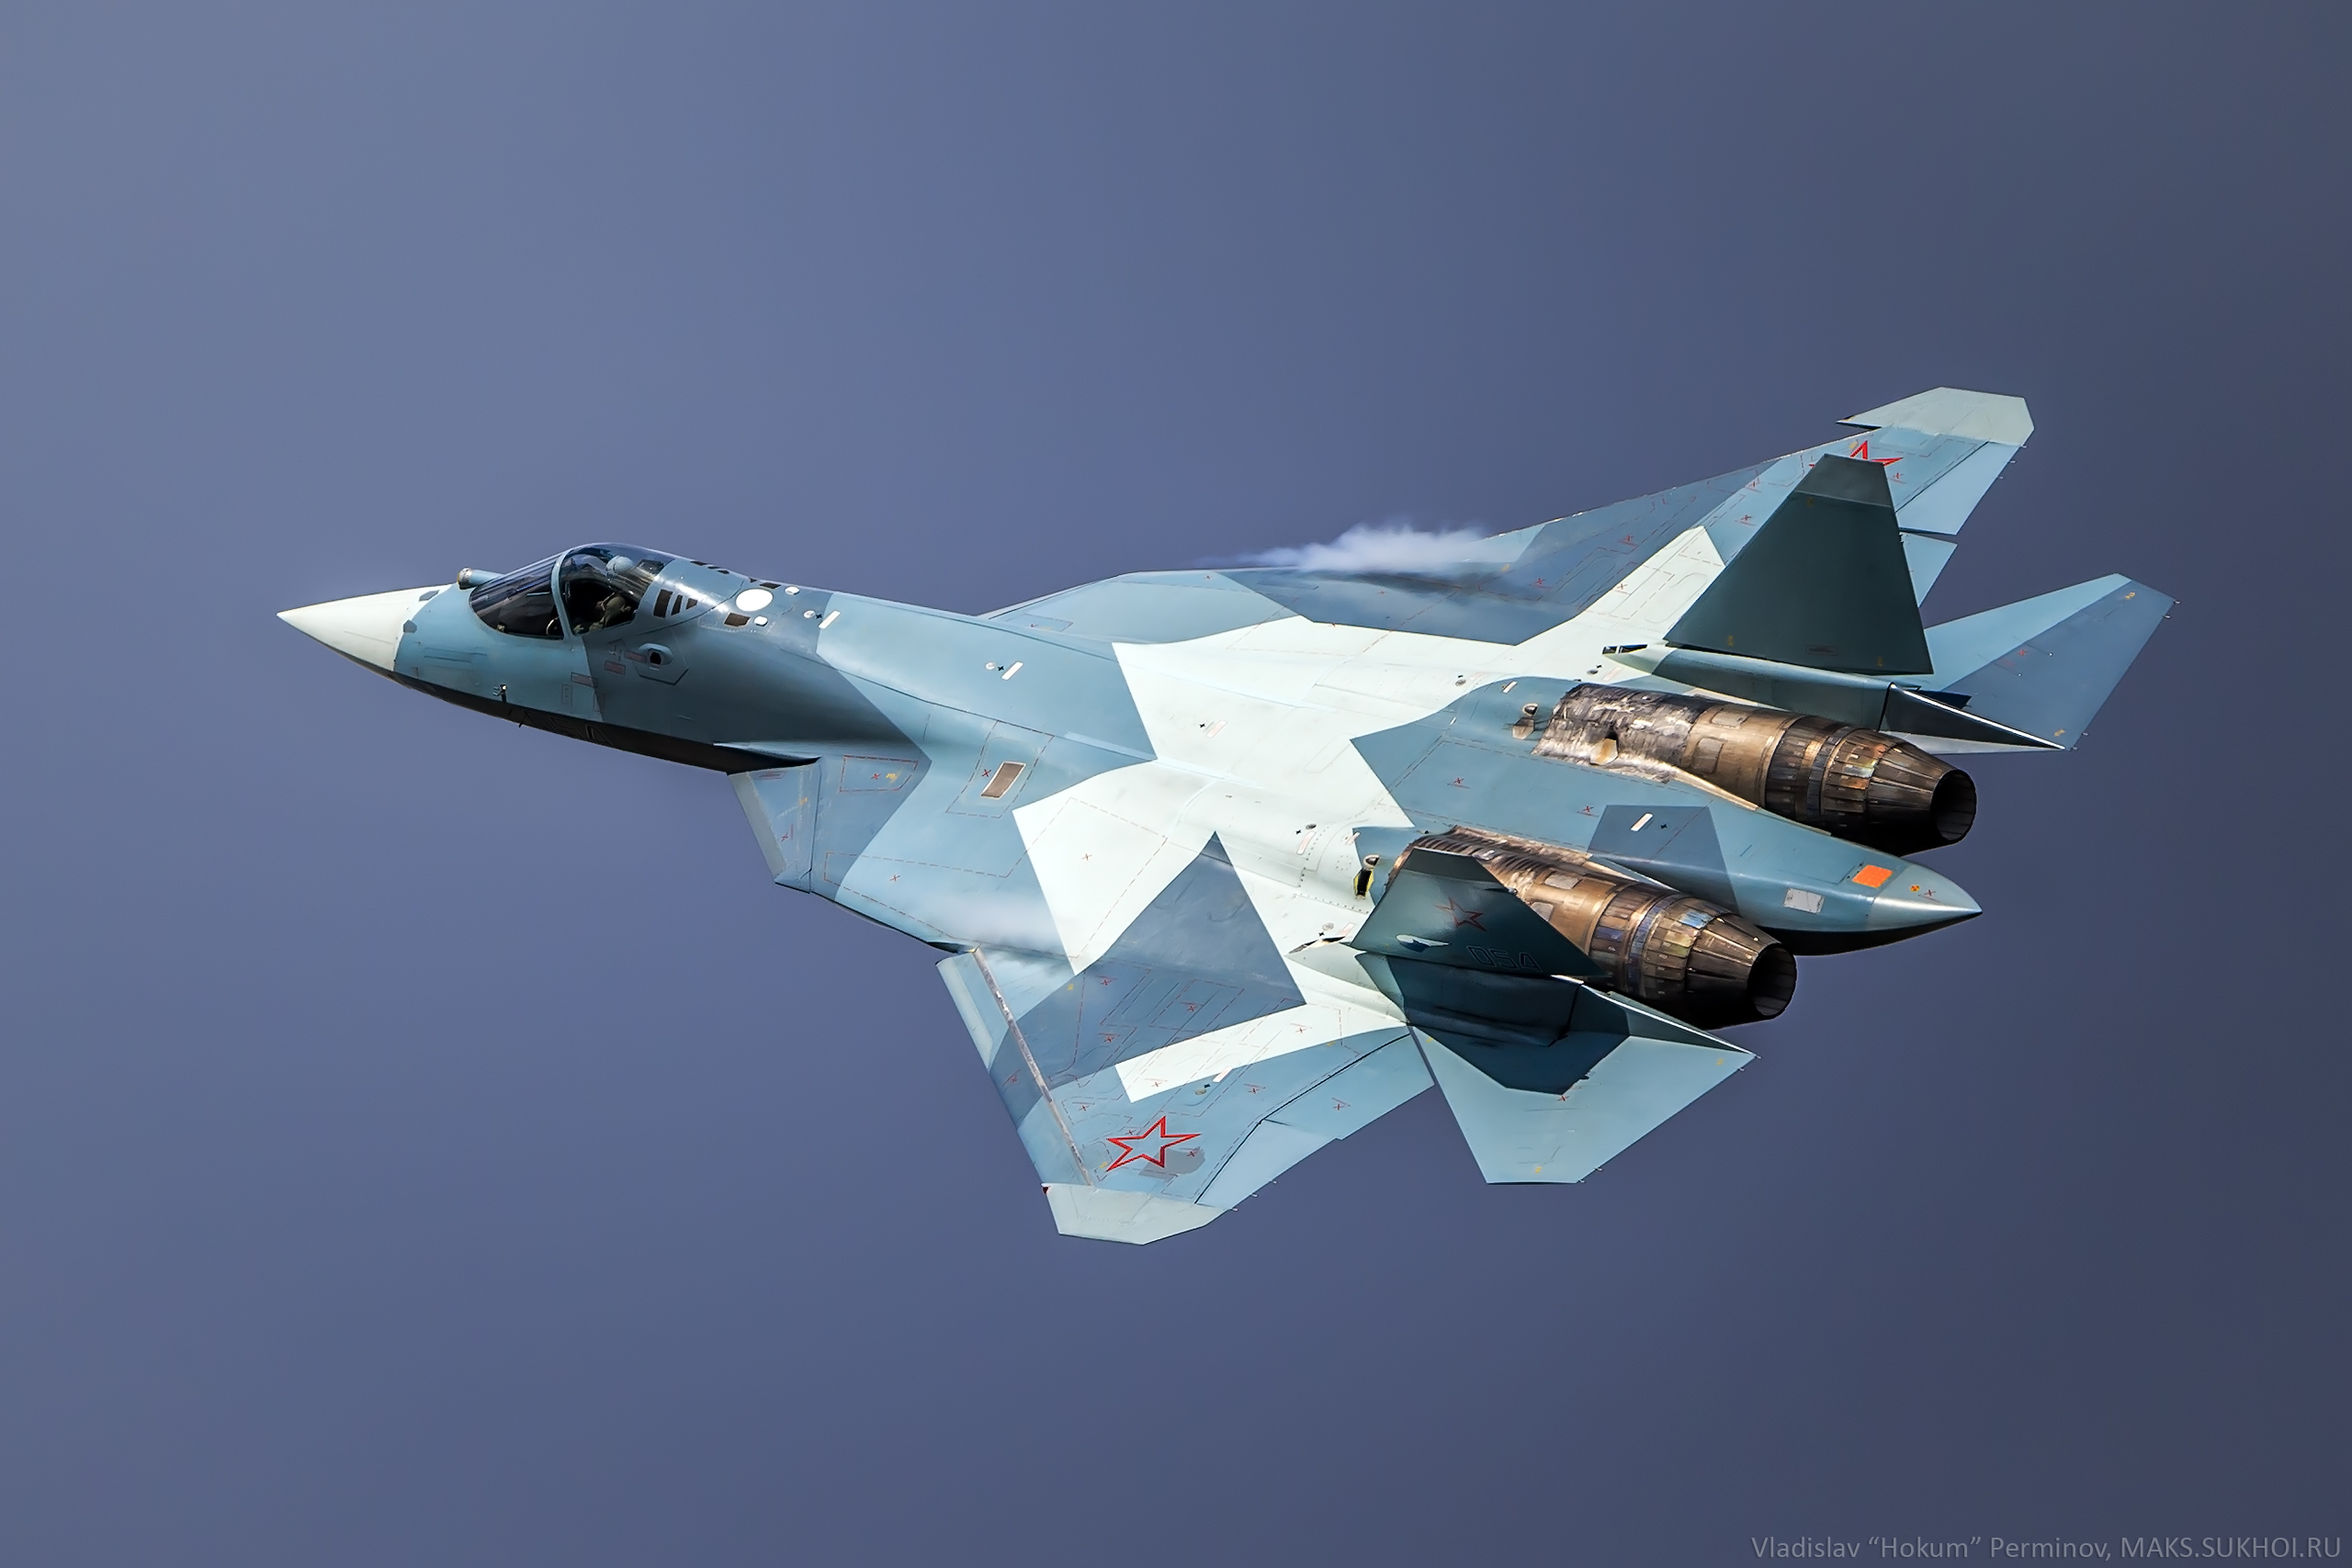 General 2560x1707 Russian Air Force aircraft military aircraft vehicle military Sukhoi Su-57 jet fighter military vehicle Russian/Soviet aircraft Sukhoi